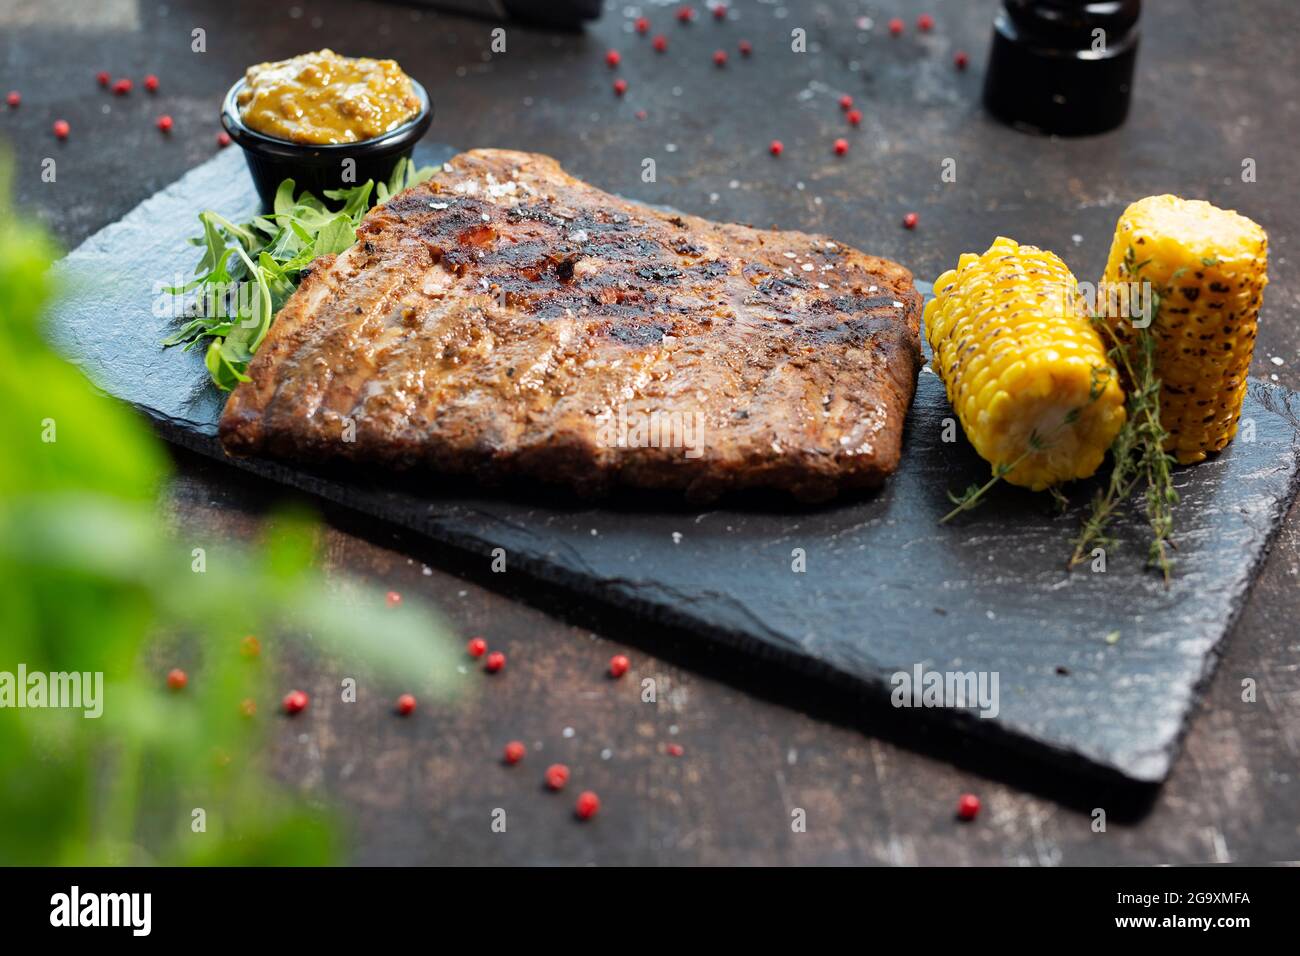 Grilled barbecue ribs, grilled corn cob, mustard sauce. The cook cooks and serves an appetizing dish. The finished dish served on a plate. Serving pro Stock Photo